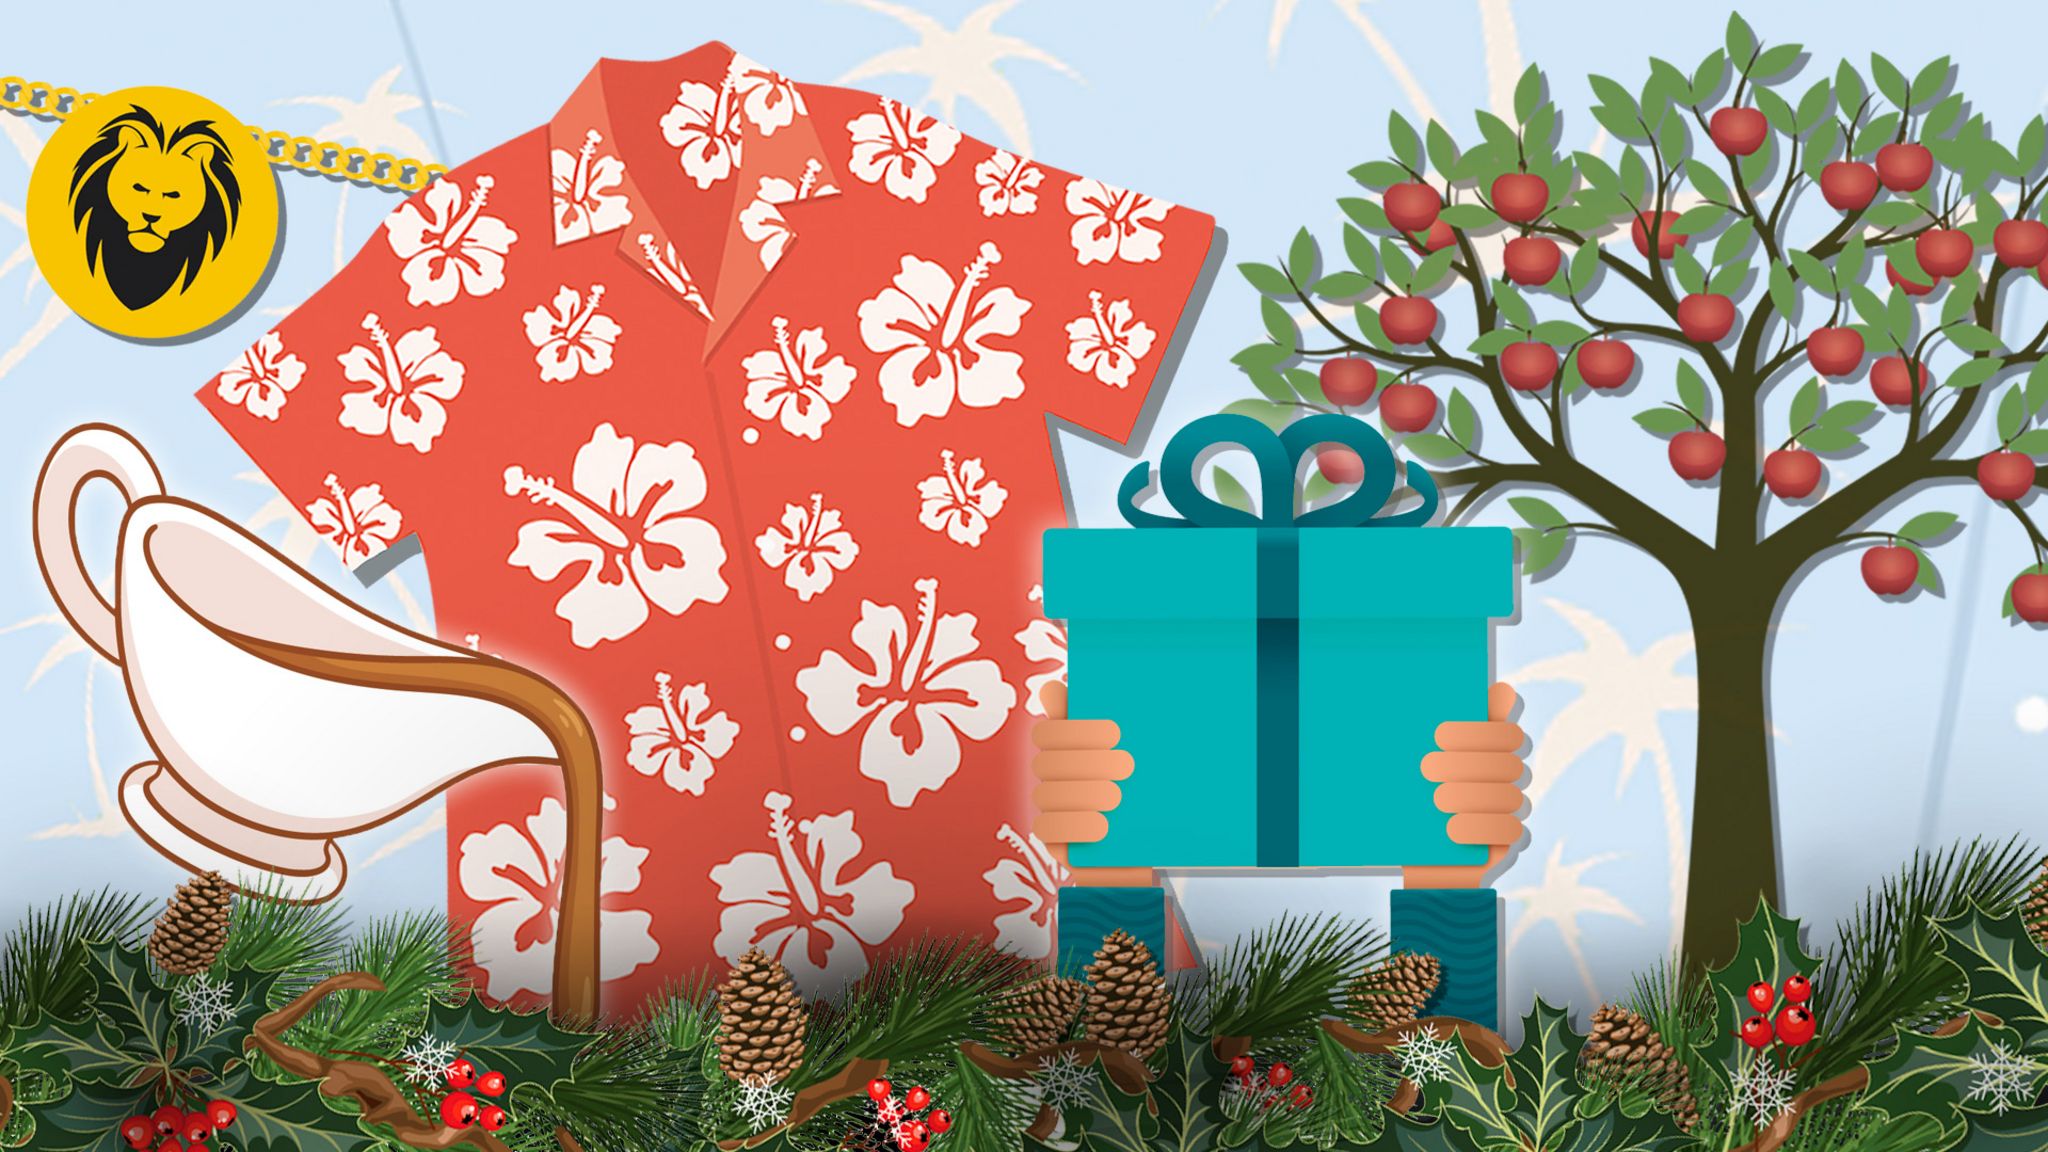 Illustration of a Hawaiian shirt, lion's head necklace, gravy boat, crab apple tree and hands holding a present